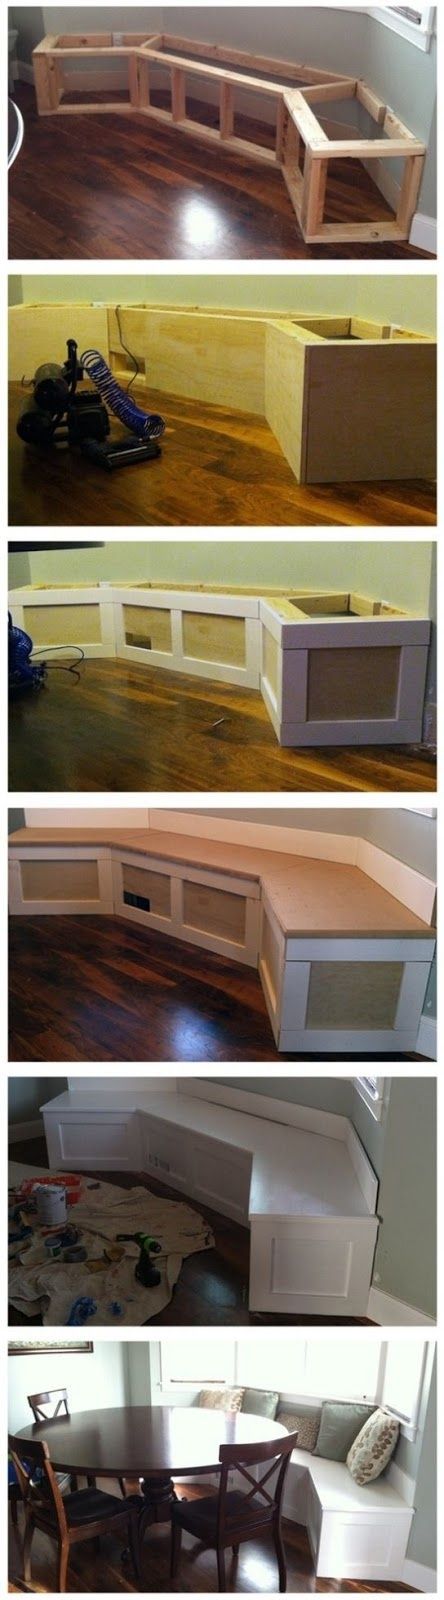 all star pics: 18 Creative And Useful Popular DIY Ideas. Heather Miranda look at this bench seat for Aunties kitchen/home renovation project.